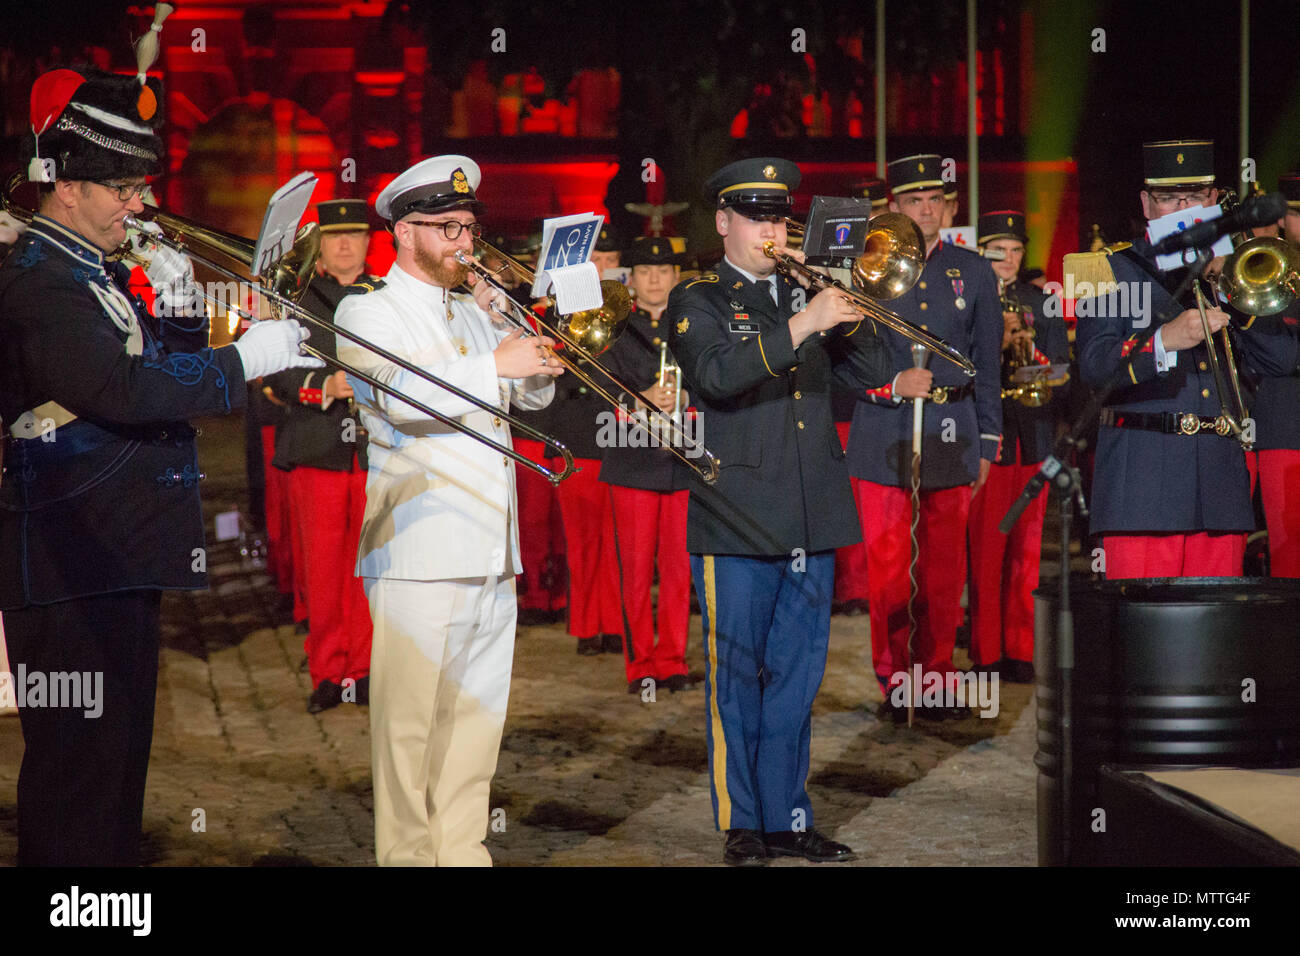 Spc Patrick Weiss, 3rd from the left, performs alongside the international trombone soloists for the Citadelle 350 anniversary military show, May 25, 2018, Lille, France.  US Army photo by Sgt Joseph Agacinski/released. Stock Photo